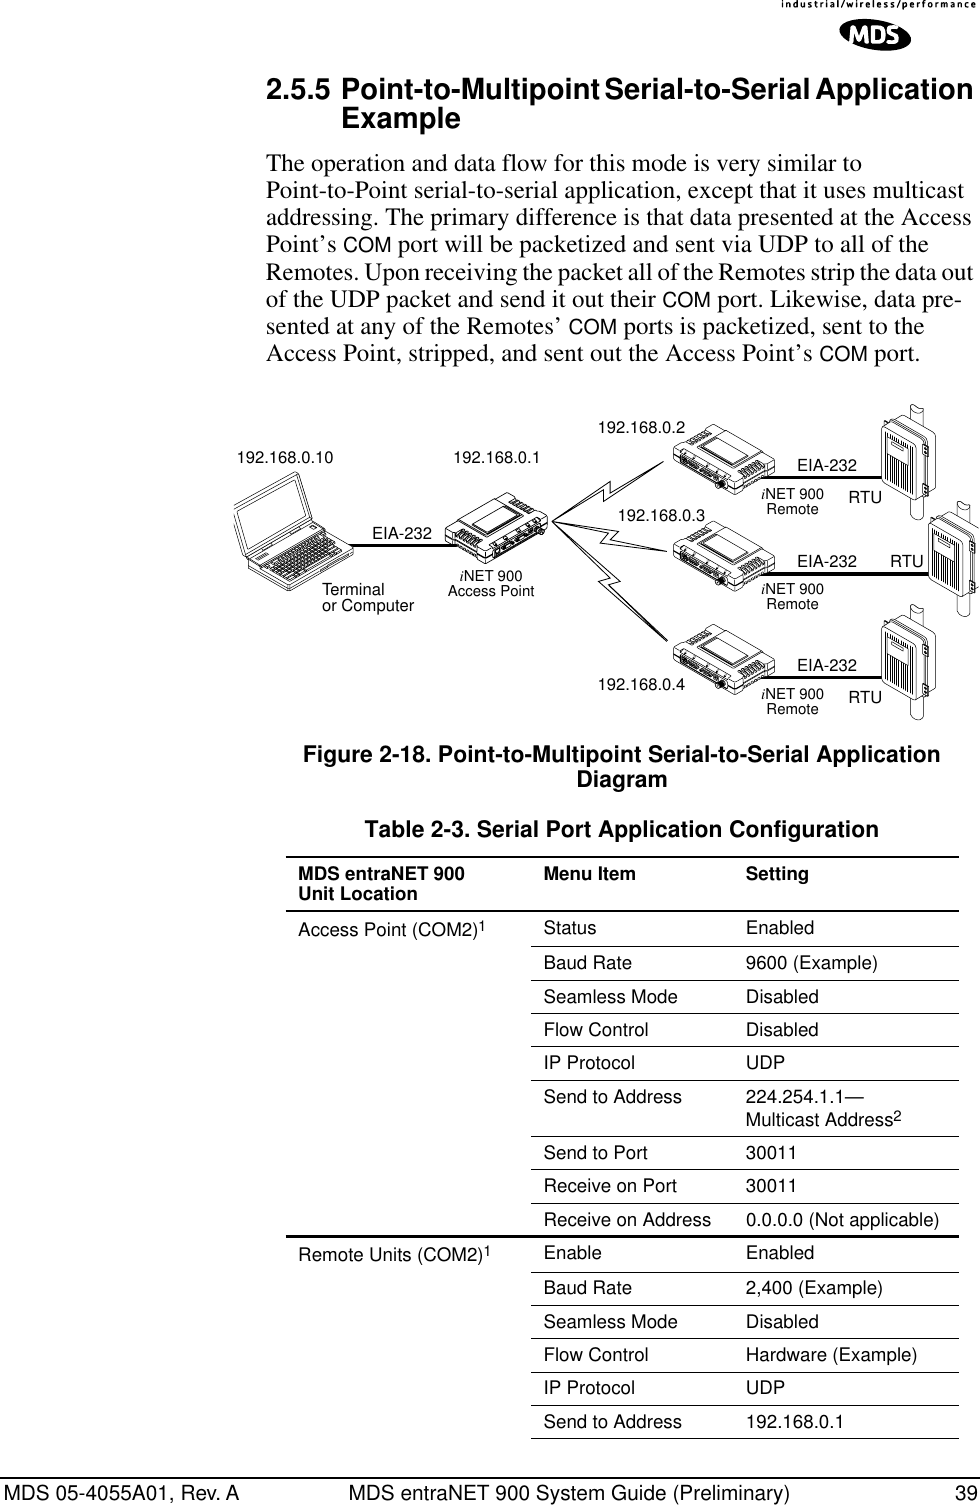 MDS 05-4055A01, Rev. A MDS entraNET 900 System Guide (Preliminary) 392.5.5 Point-to-Multipoint Serial-to-Serial Application ExampleThe operation and data flow for this mode is very similar to Point-to-Point serial-to-serial application, except that it uses multicast addressing. The primary difference is that data presented at the Access Point’s COM port will be packetized and sent via UDP to all of the Remotes. Upon receiving the packet all of the Remotes strip the data out of the UDP packet and send it out their COM port. Likewise, data pre-sented at any of the Remotes’ COM ports is packetized, sent to the Access Point, stripped, and sent out the Access Point’s COM port.Invisible place holderFigure 2-18. Point-to-Multipoint Serial-to-Serial Application Diagram Invisible place holder192.168.0.3192.168.0.4EIA-232Terminalor ComputerRTURTURTUEIA-232EIA-232EIA-232192.168.0.10 192.168.0.1192.168.0.2iNET 900Access PointLANCOM1COM2PWRLINKiNET 900RemoteLANCOM1COM2PWRLINKiNET 900RemoteLANCOM1COM2PWRLINKiNET 900RemoteTable 2-3. Serial Port Application ConfigurationMDS entraNET 900Unit Location Menu Item SettingAccess Point (COM2)1Status EnabledBaud Rate 9600 (Example)Seamless Mode Disabled Flow Control DisabledIP Protocol UDPSend to Address 224.254.1.1—Multicast Address2Send to Port 30011 Receive on Port 30011 Receive on Address 0.0.0.0 (Not applicable)Remote Units (COM2)1Enable EnabledBaud Rate 2,400 (Example)Seamless Mode Disabled Flow Control Hardware (Example)IP Protocol UDPSend to Address 192.168.0.1